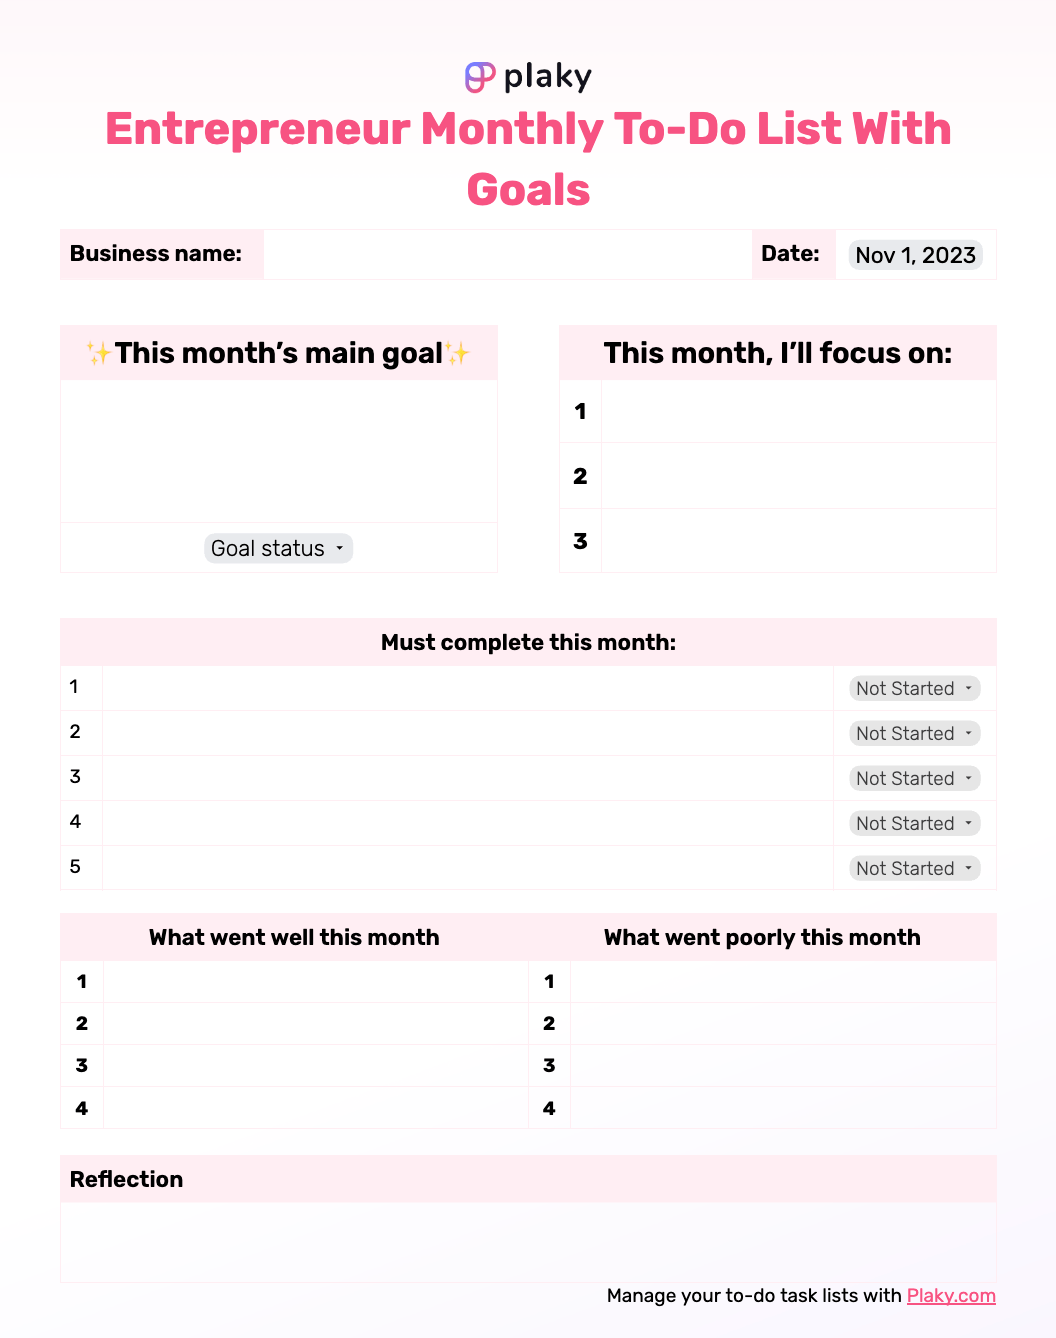 Entrepreneur monthly to-do list template with goals